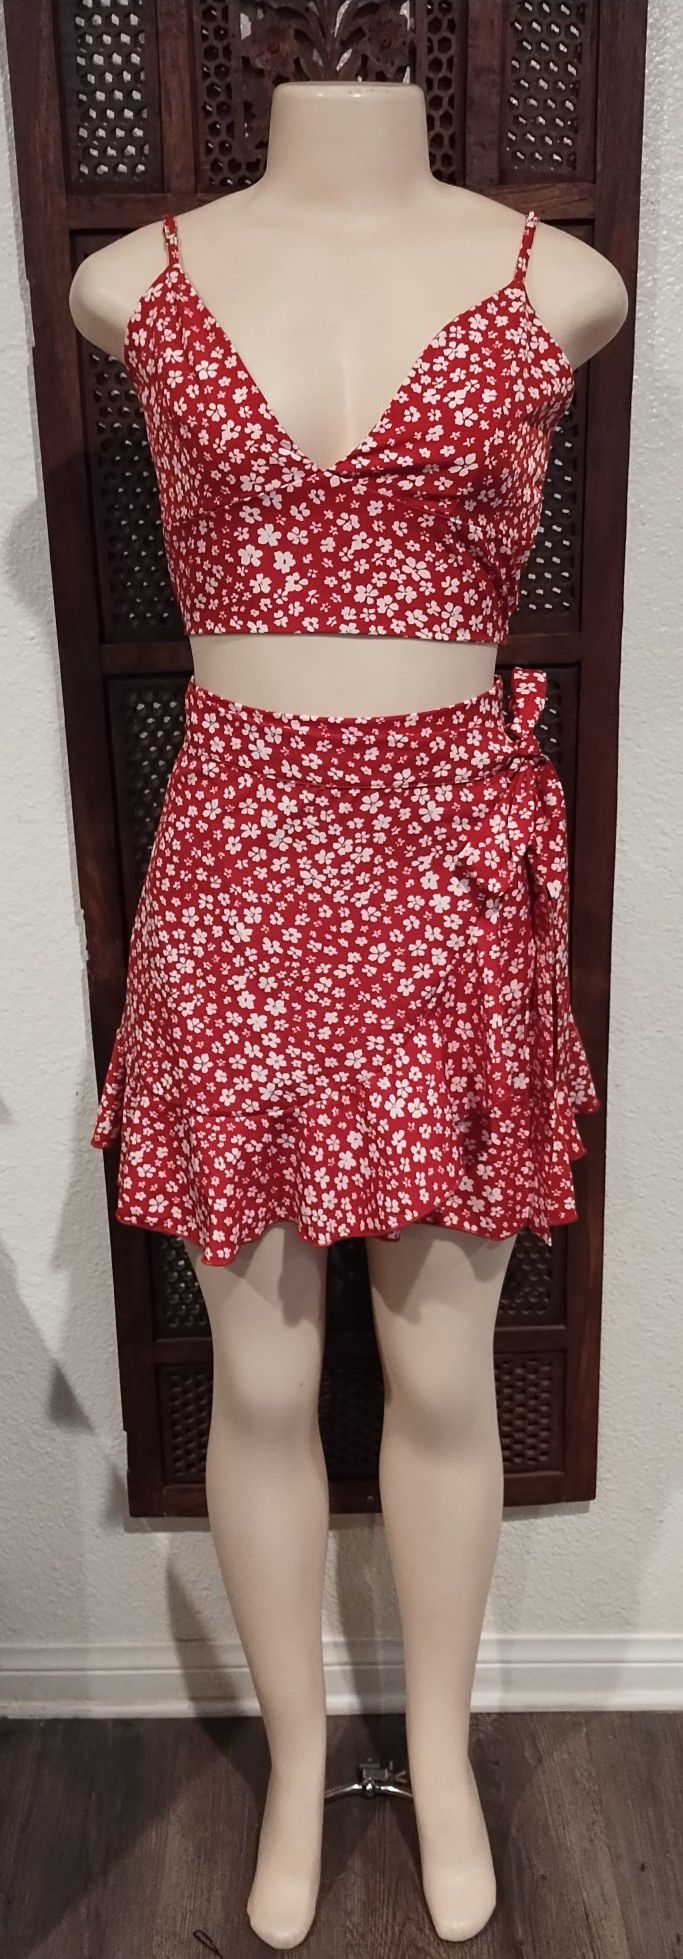 New Zaful Summer Crop Top And Wrap Skirt 